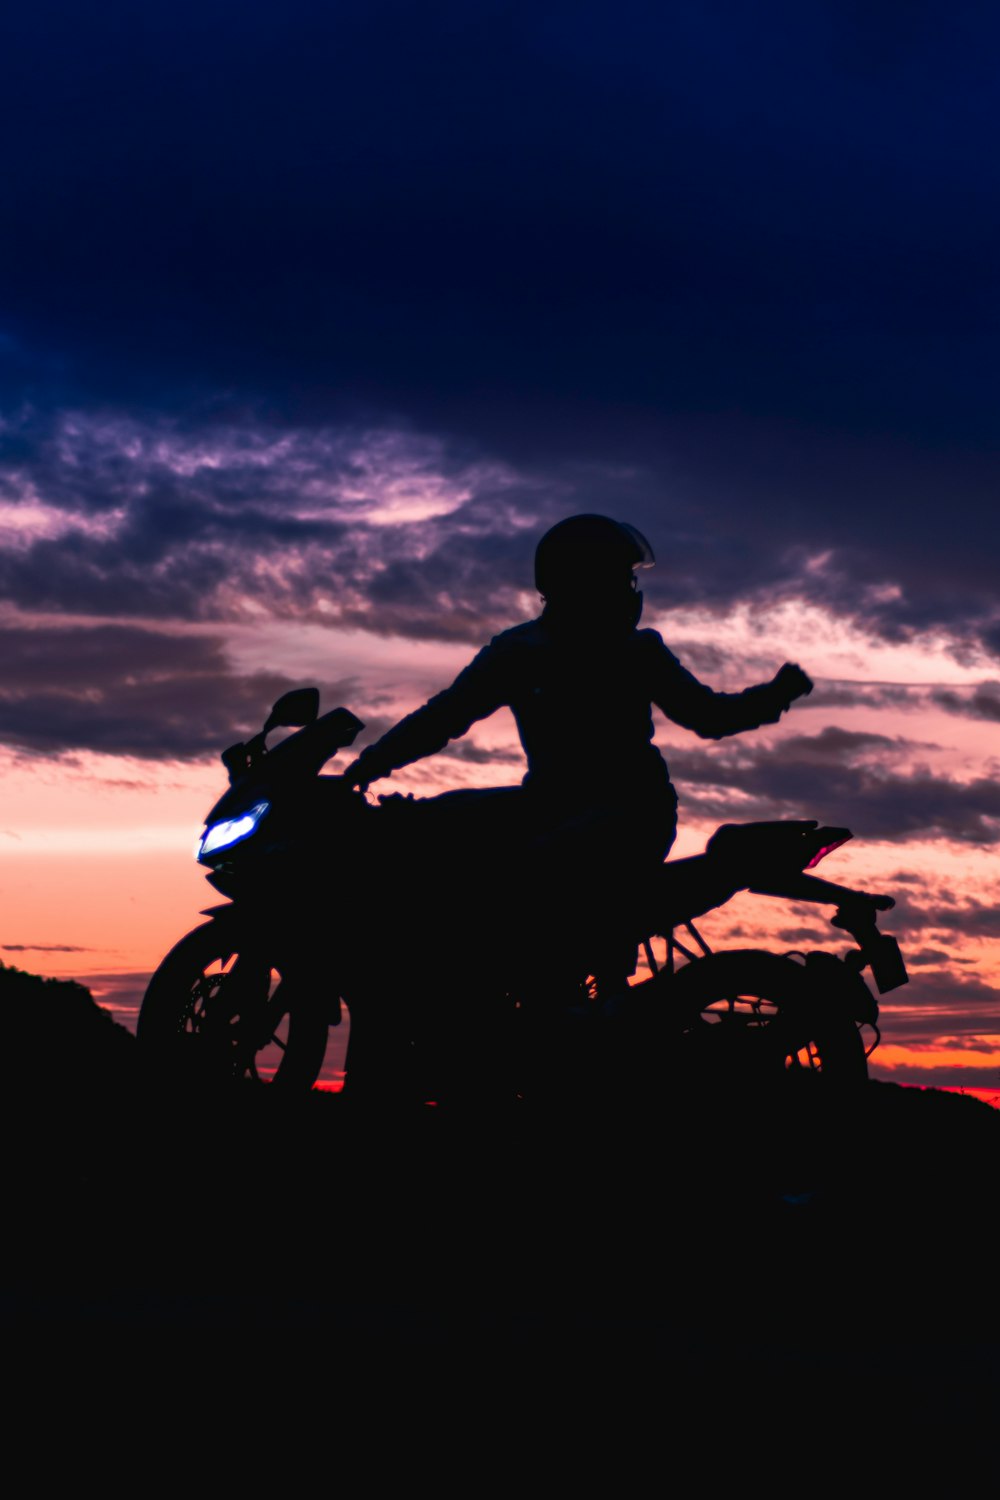 silhouette of man riding motorcycle under cloudy sky during daytime